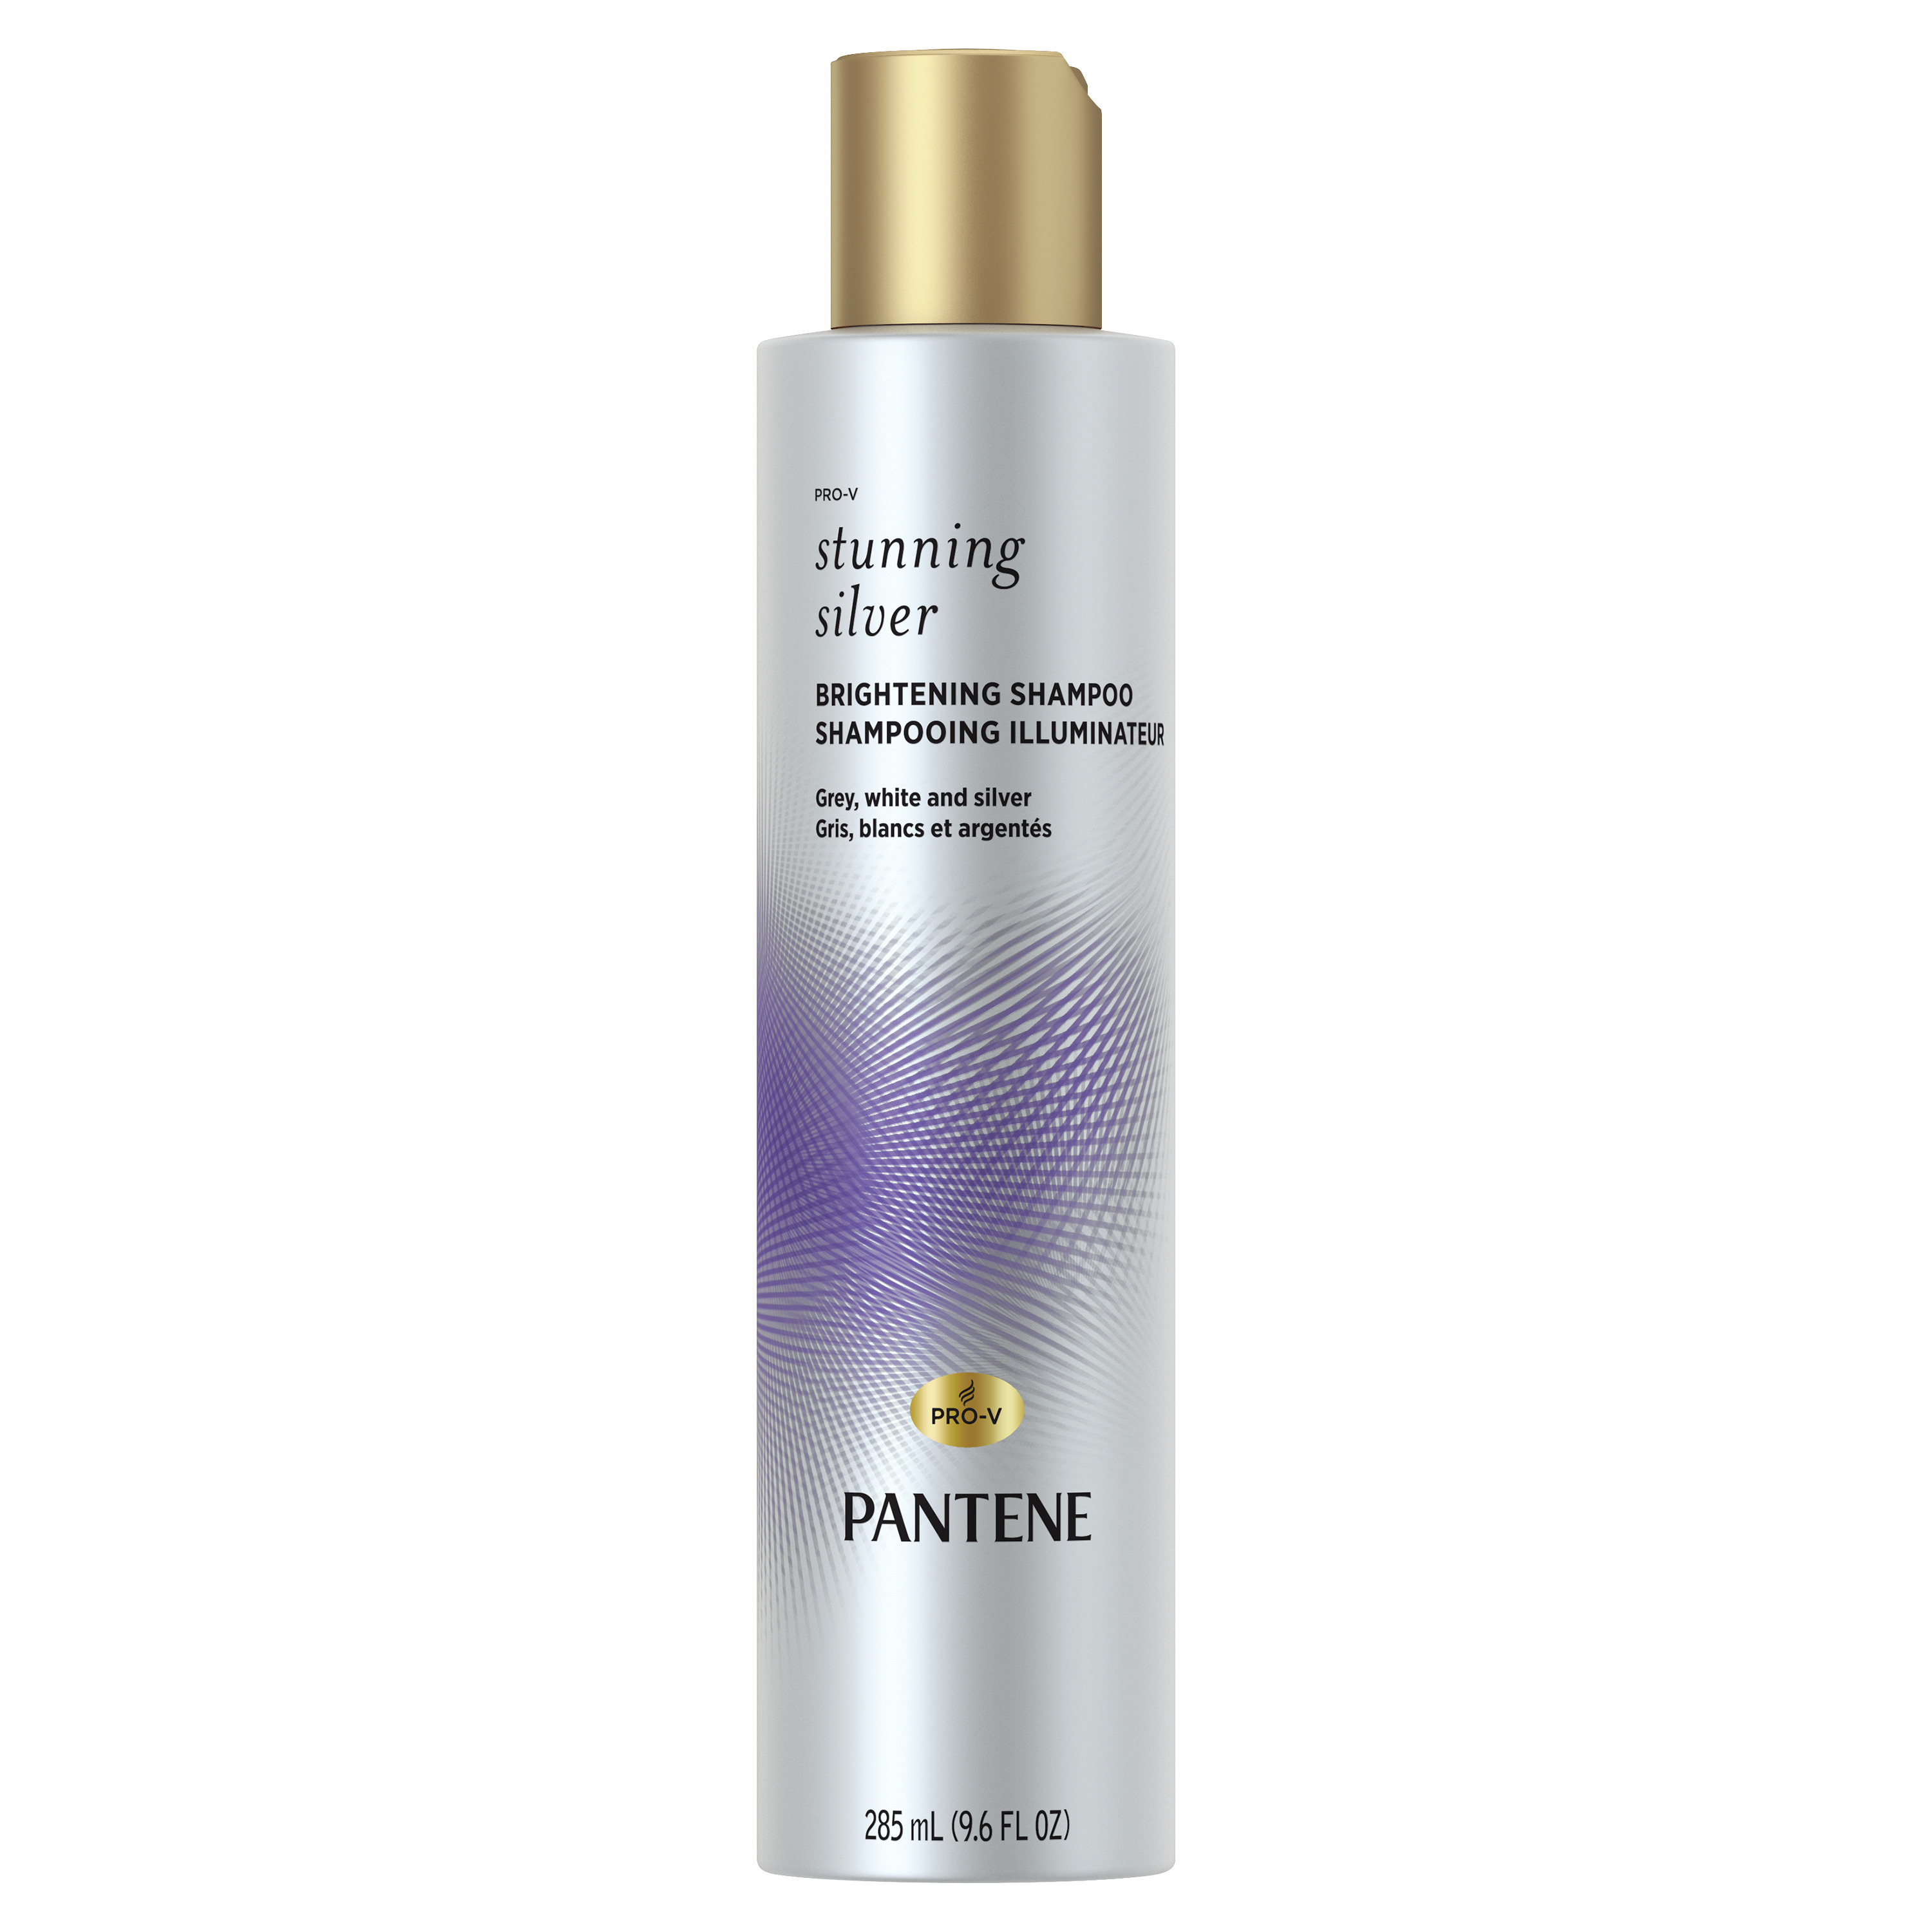 Shampooing colorant Gris pure blanc 250 ml